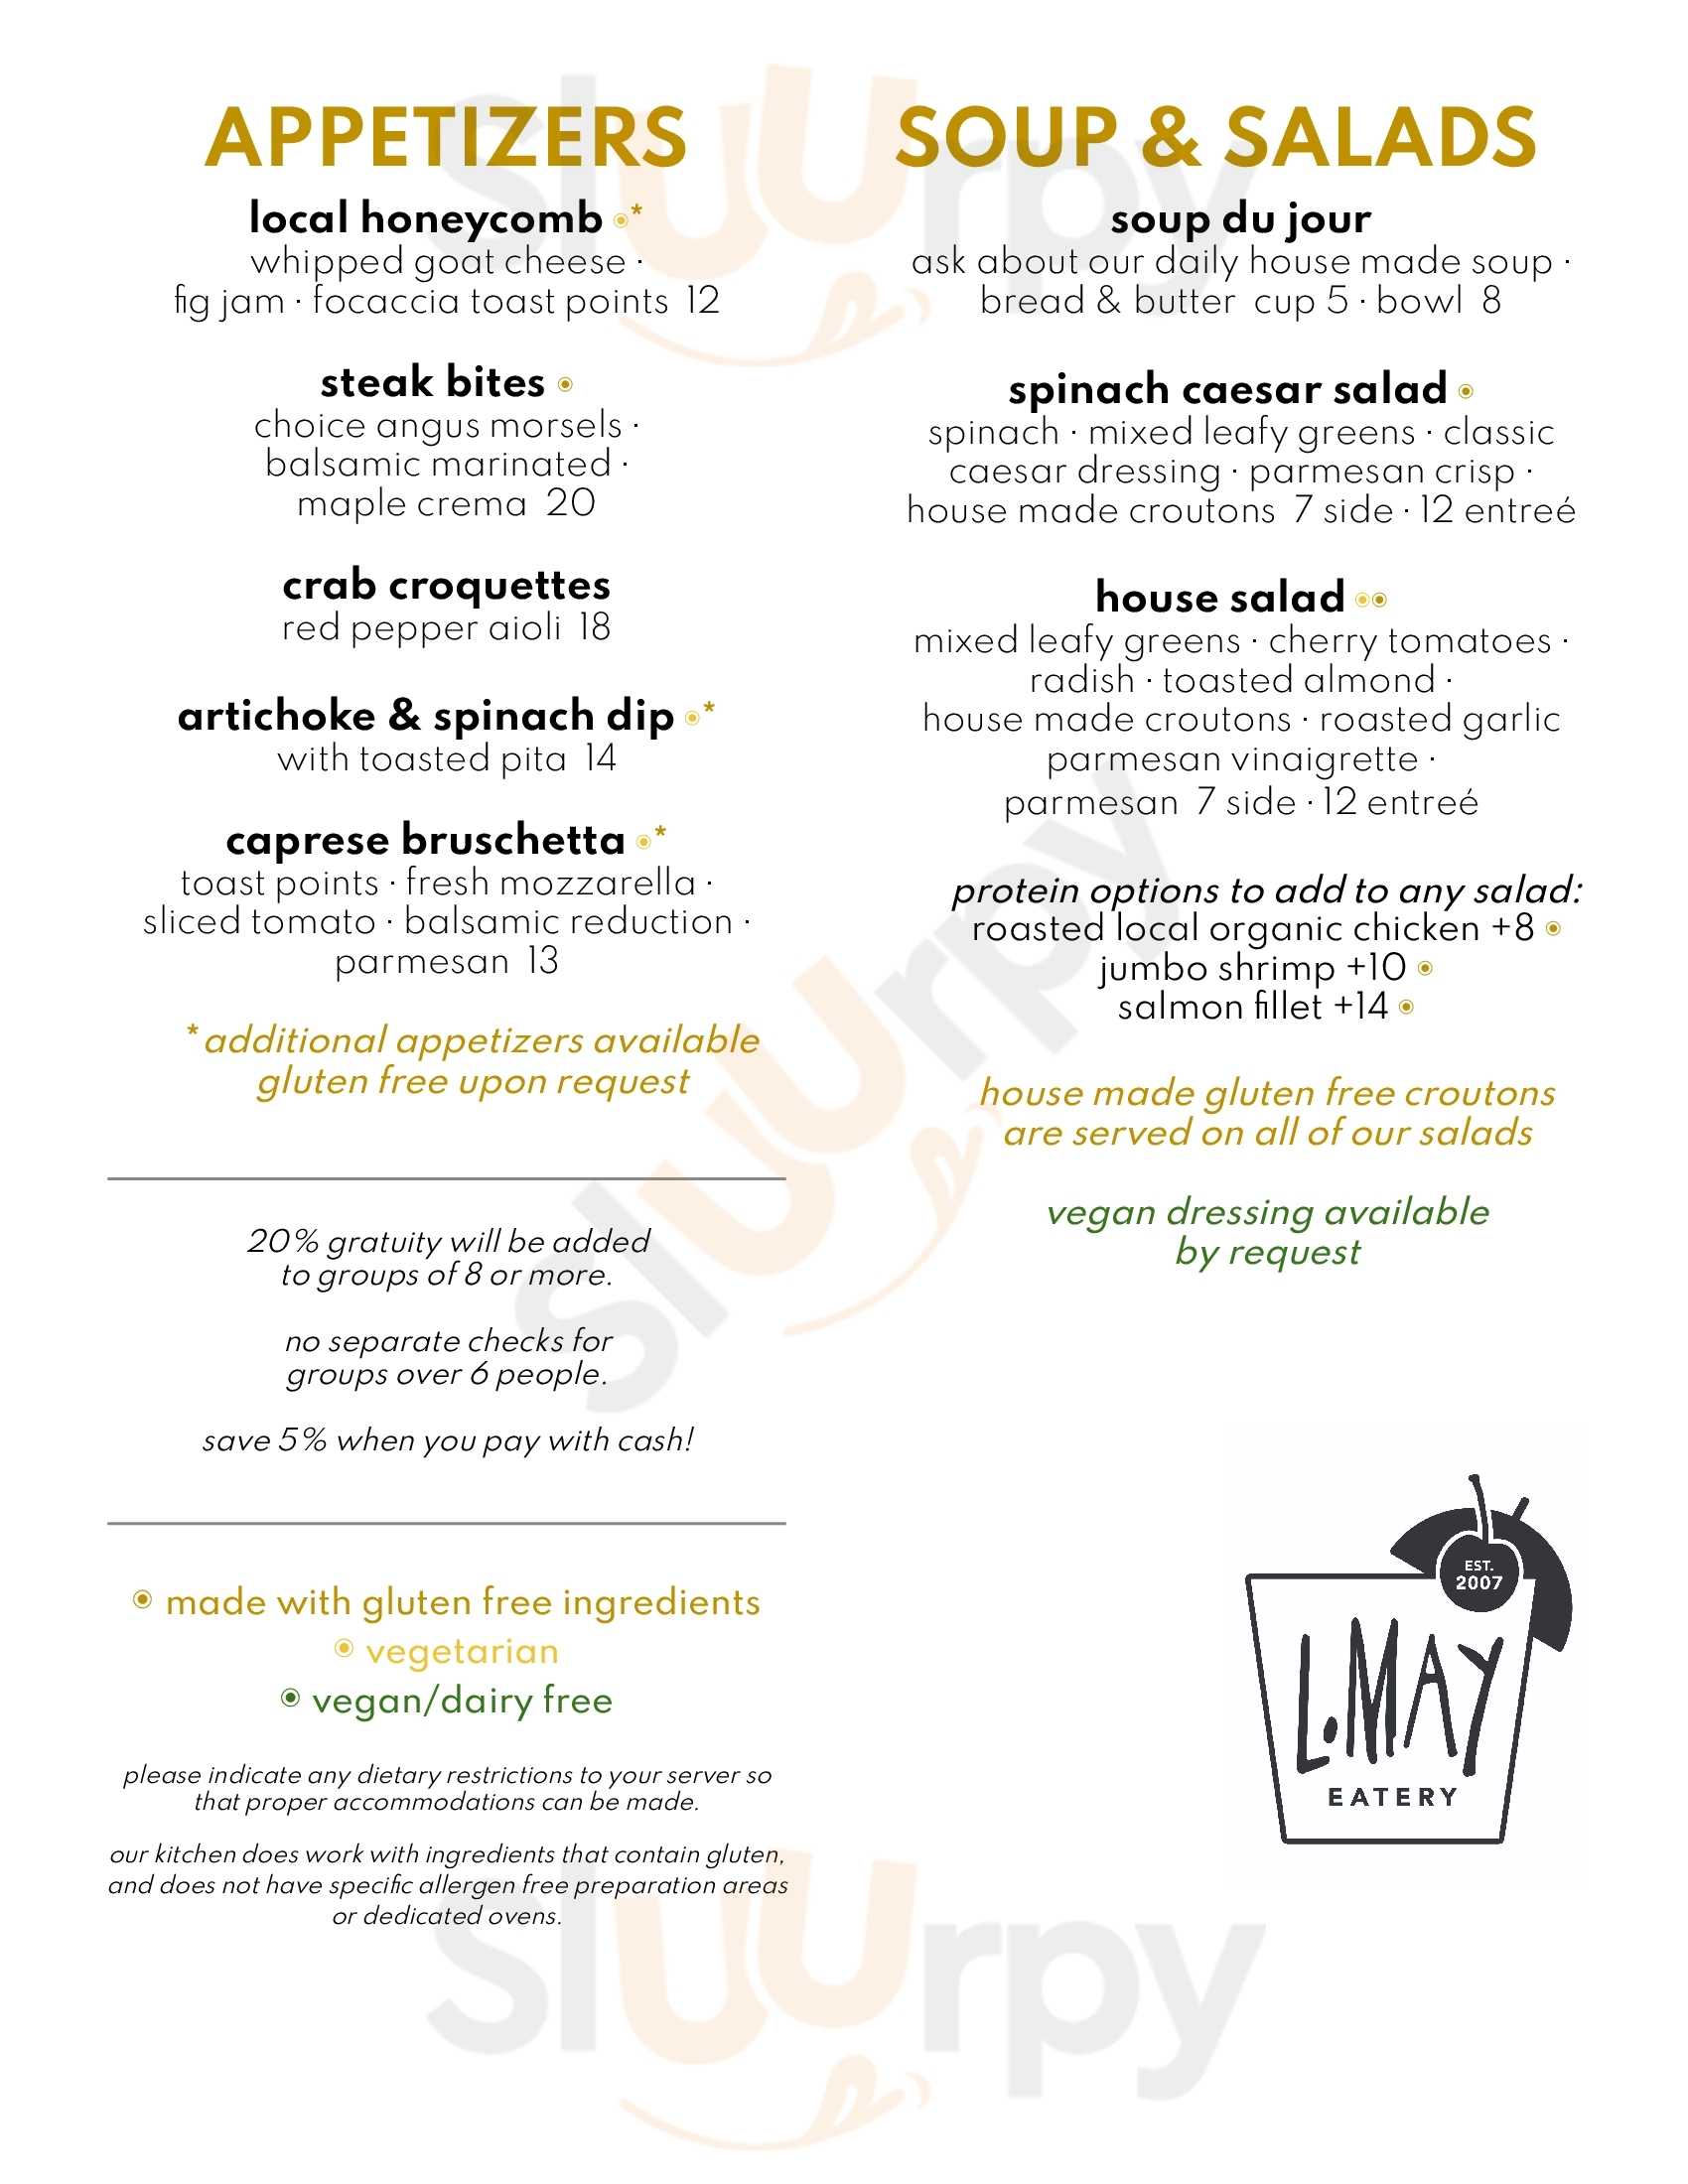 L.may Eatery Dubuque Menu - 1